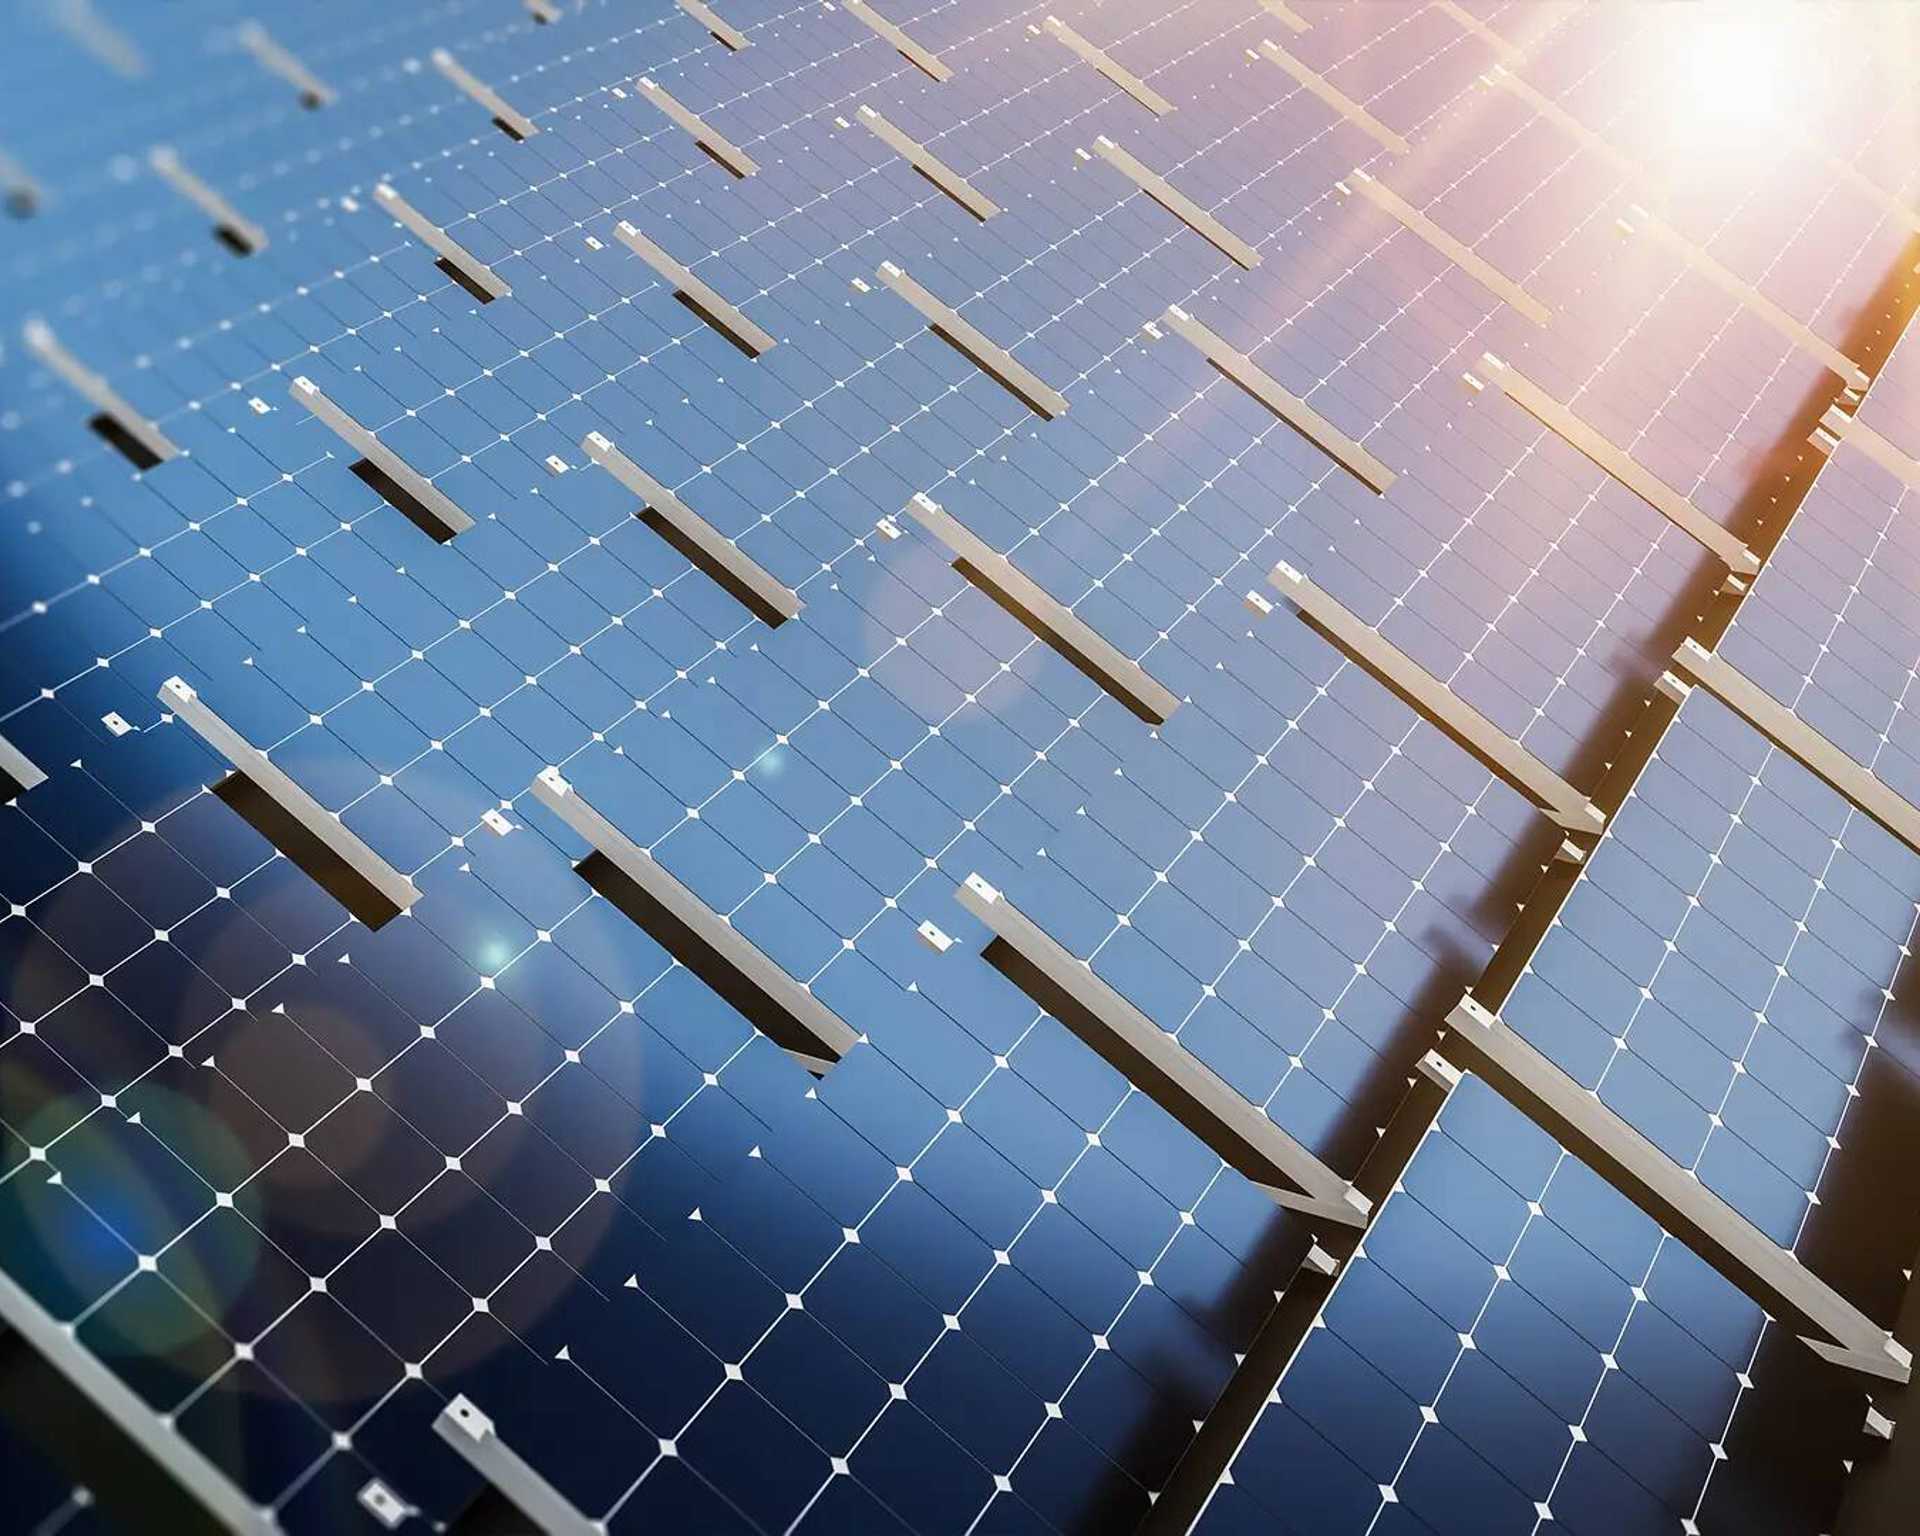 “Solar Energy Partners on Three Considerations Before Every Build”